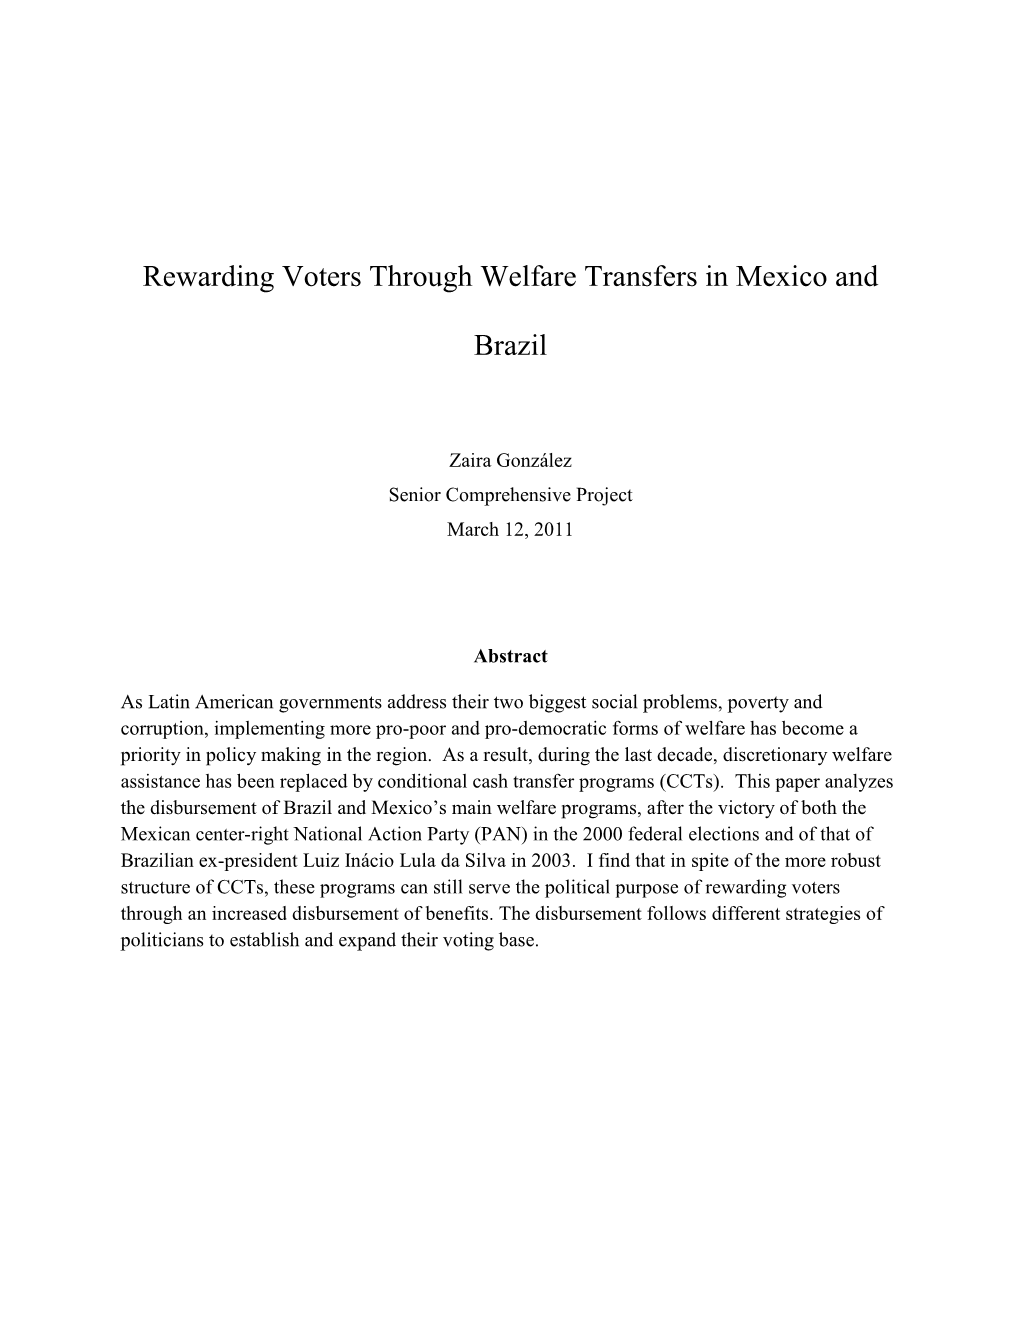 Rewarding Voters Through Welfare Transfers in Mexico and Brazil